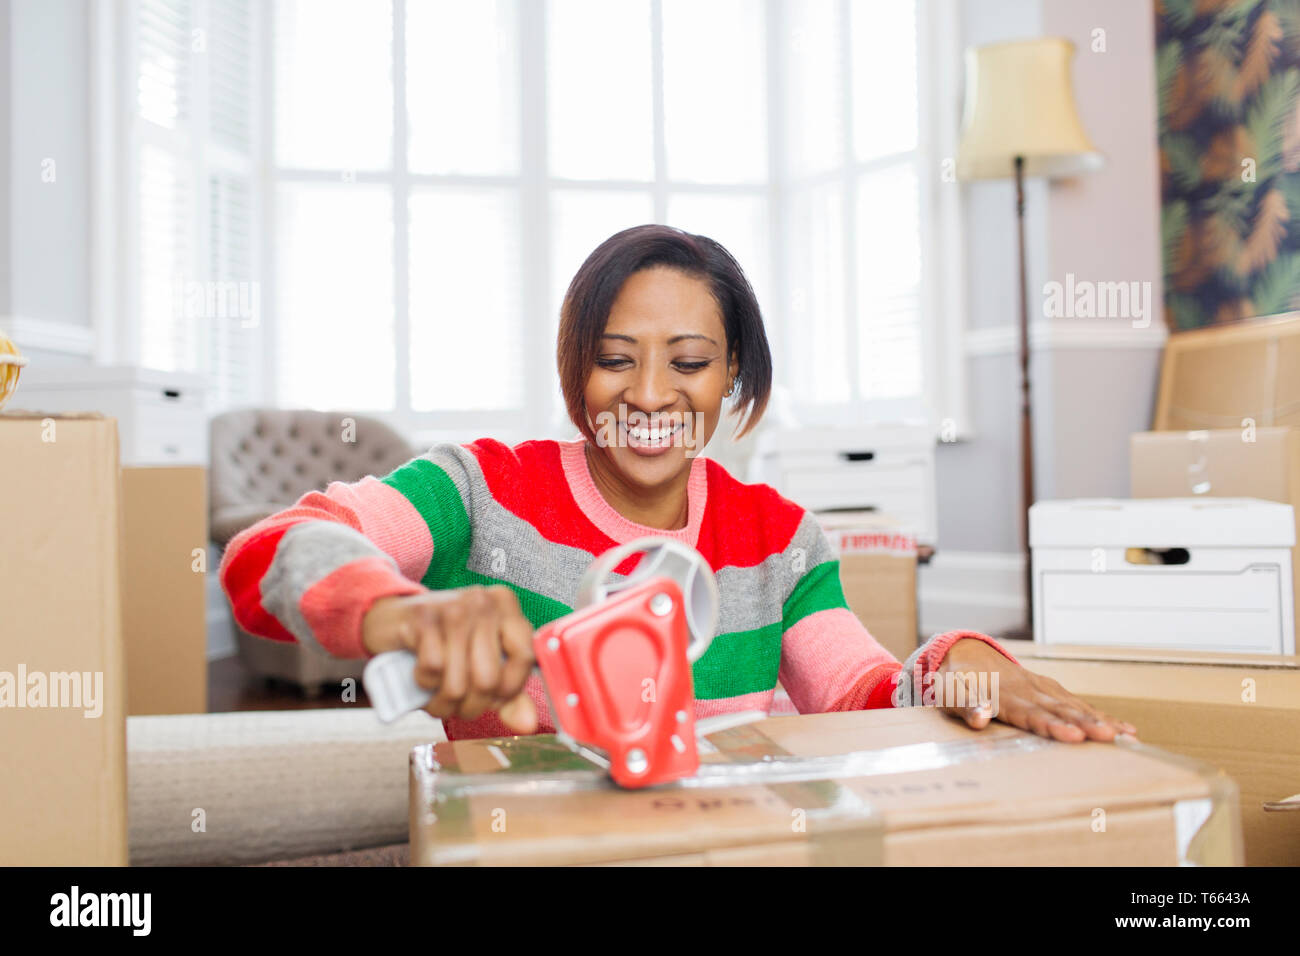 Smiling woman taping moving boxes, moving house Stock Photo